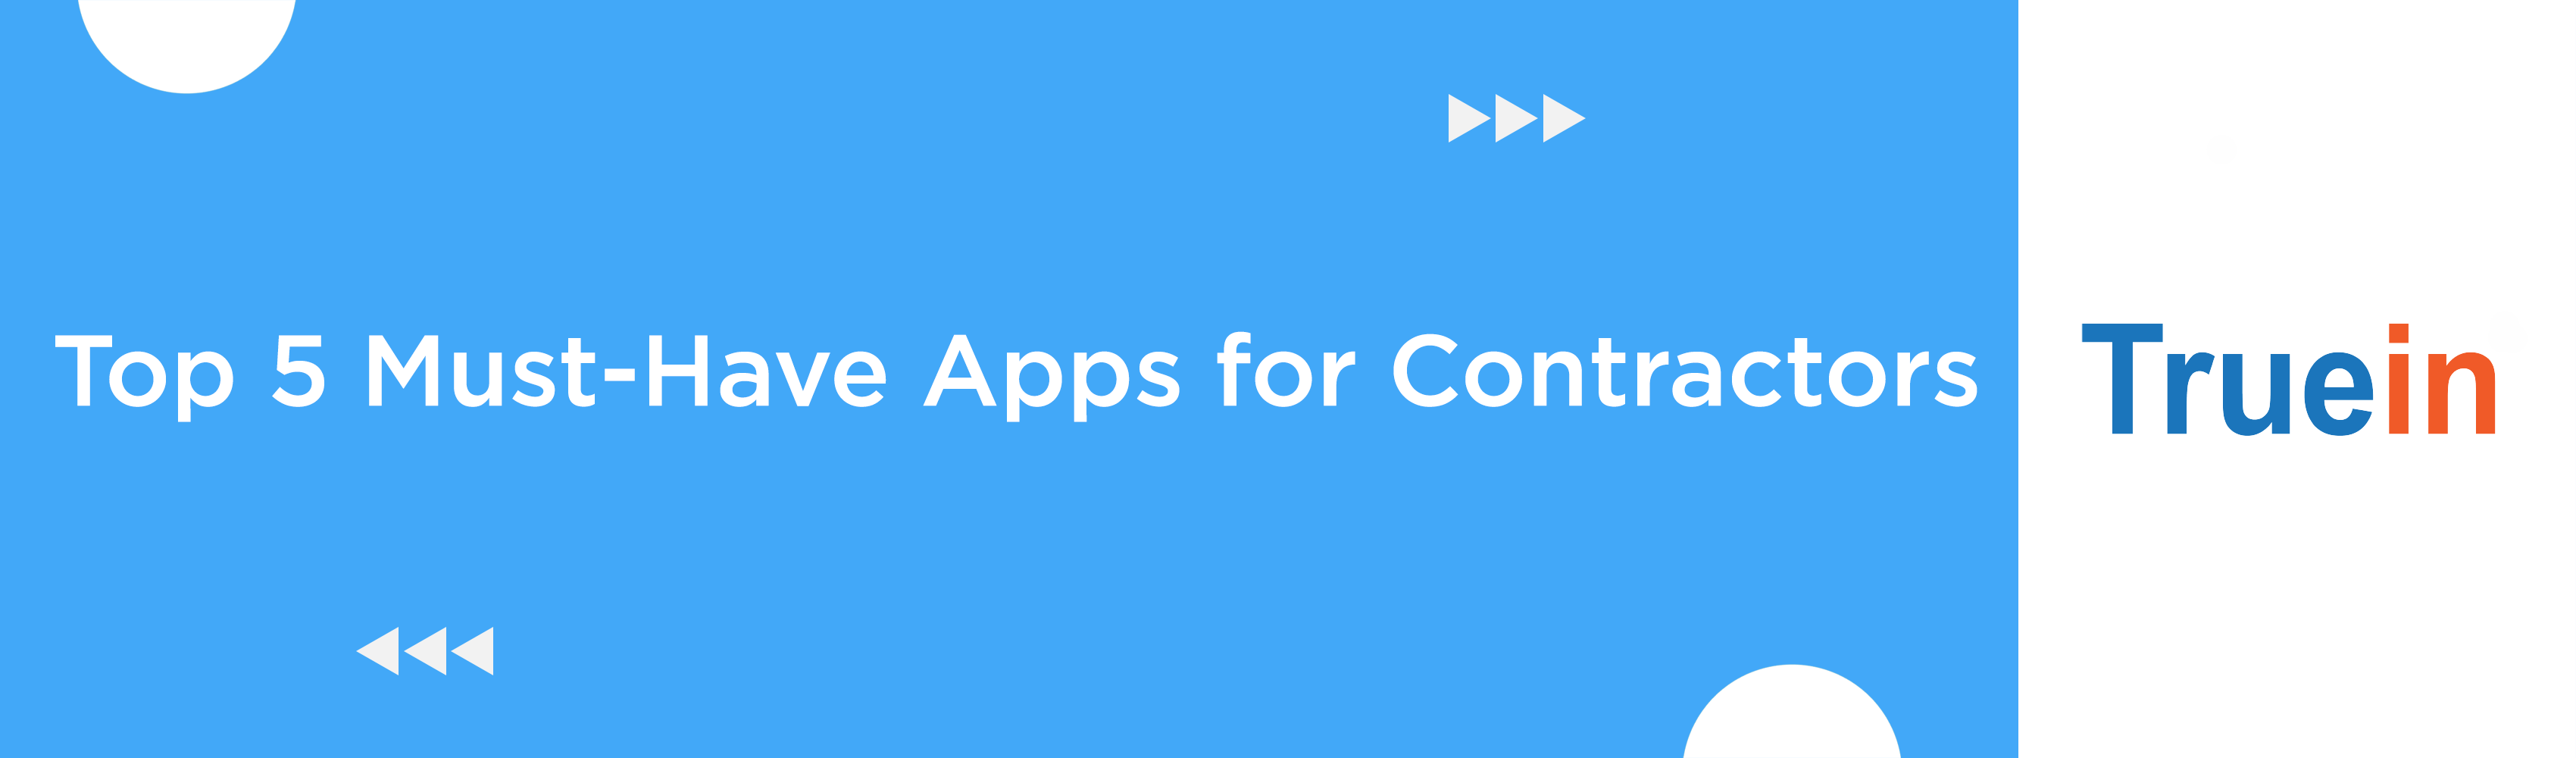 Top 5 Must Have Apps for Contractors